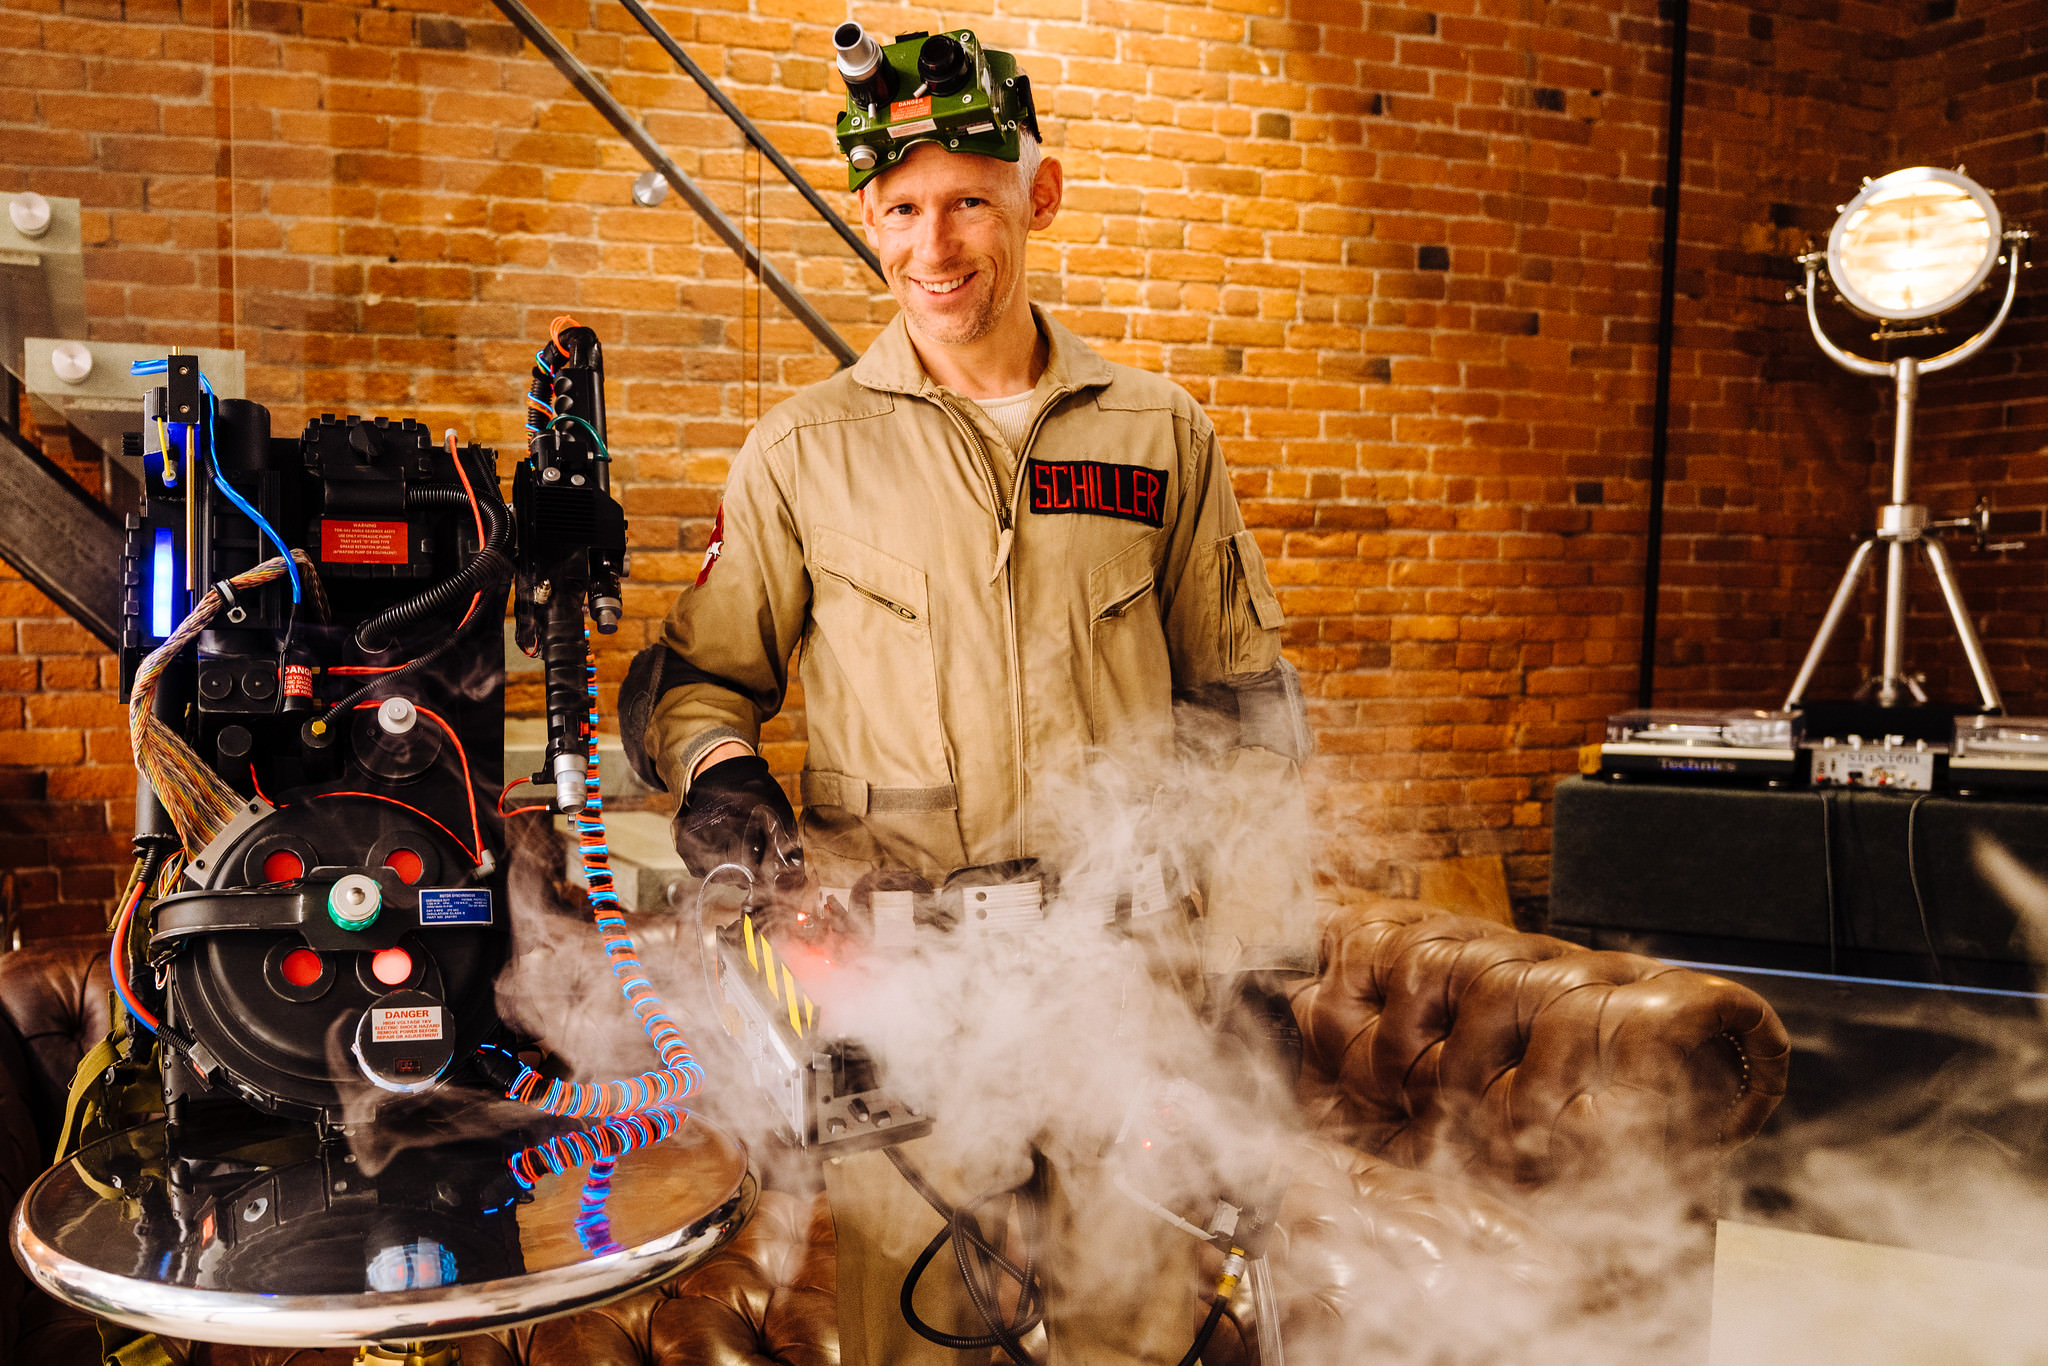 Ghostbusters, proton pack + smoking trap: We got one! (And a real smelly one, at that.)